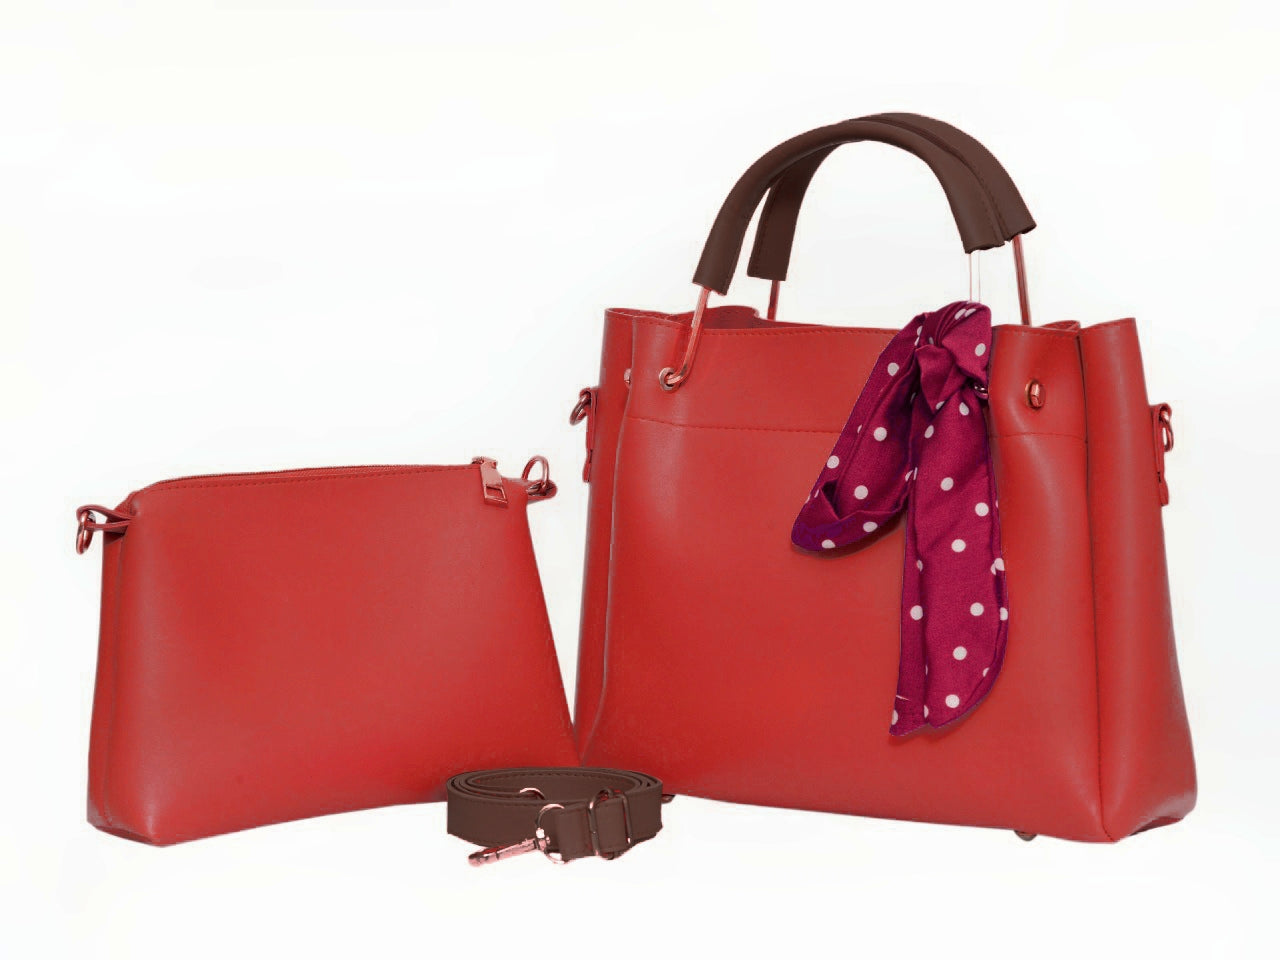 MOSCOW MEDIUM RED BAG